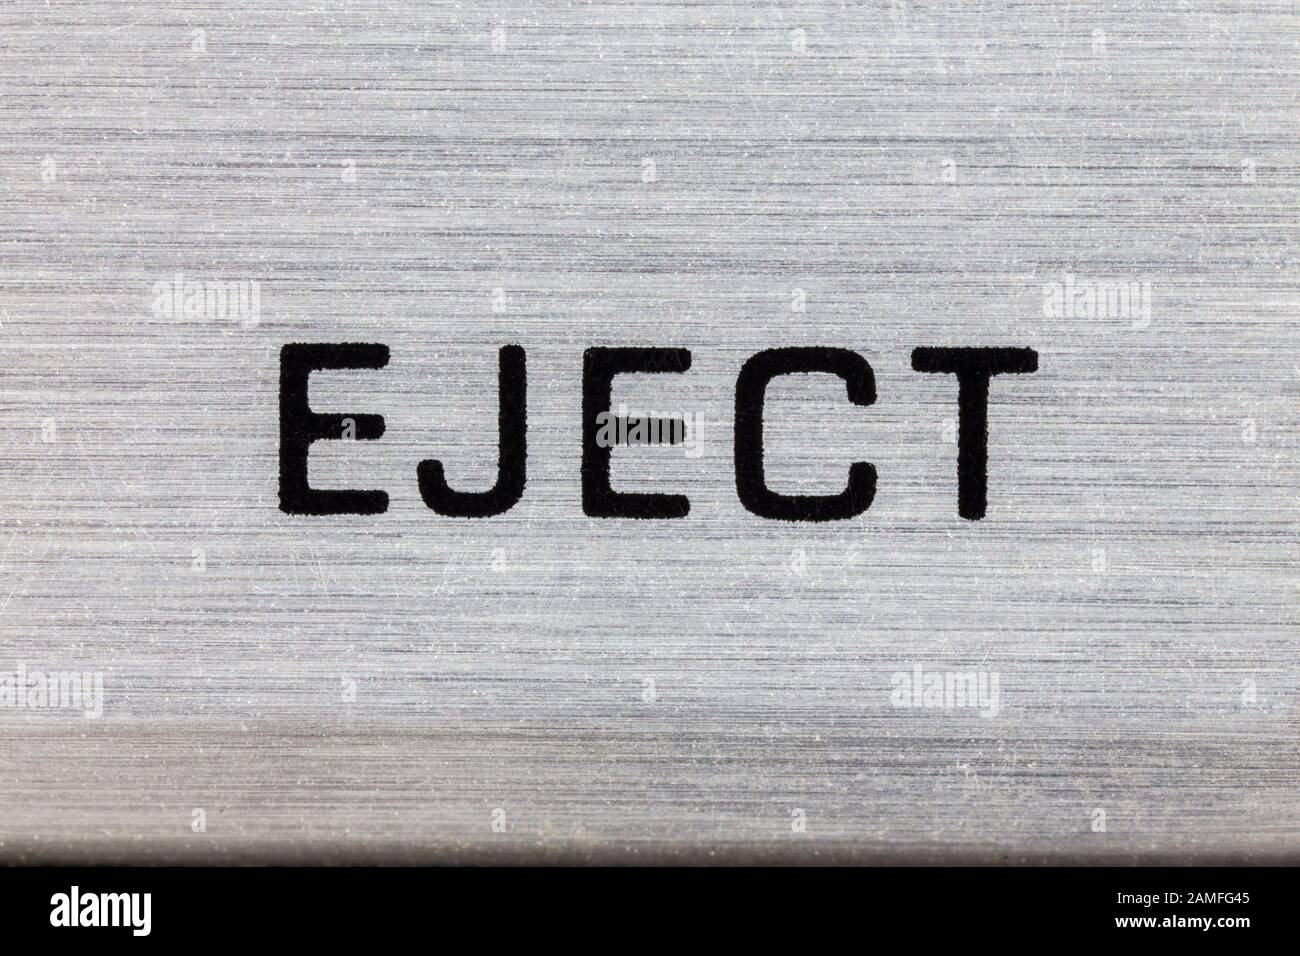 Macro close up photograph of vintage tape machine eject button detail. Stock Photo